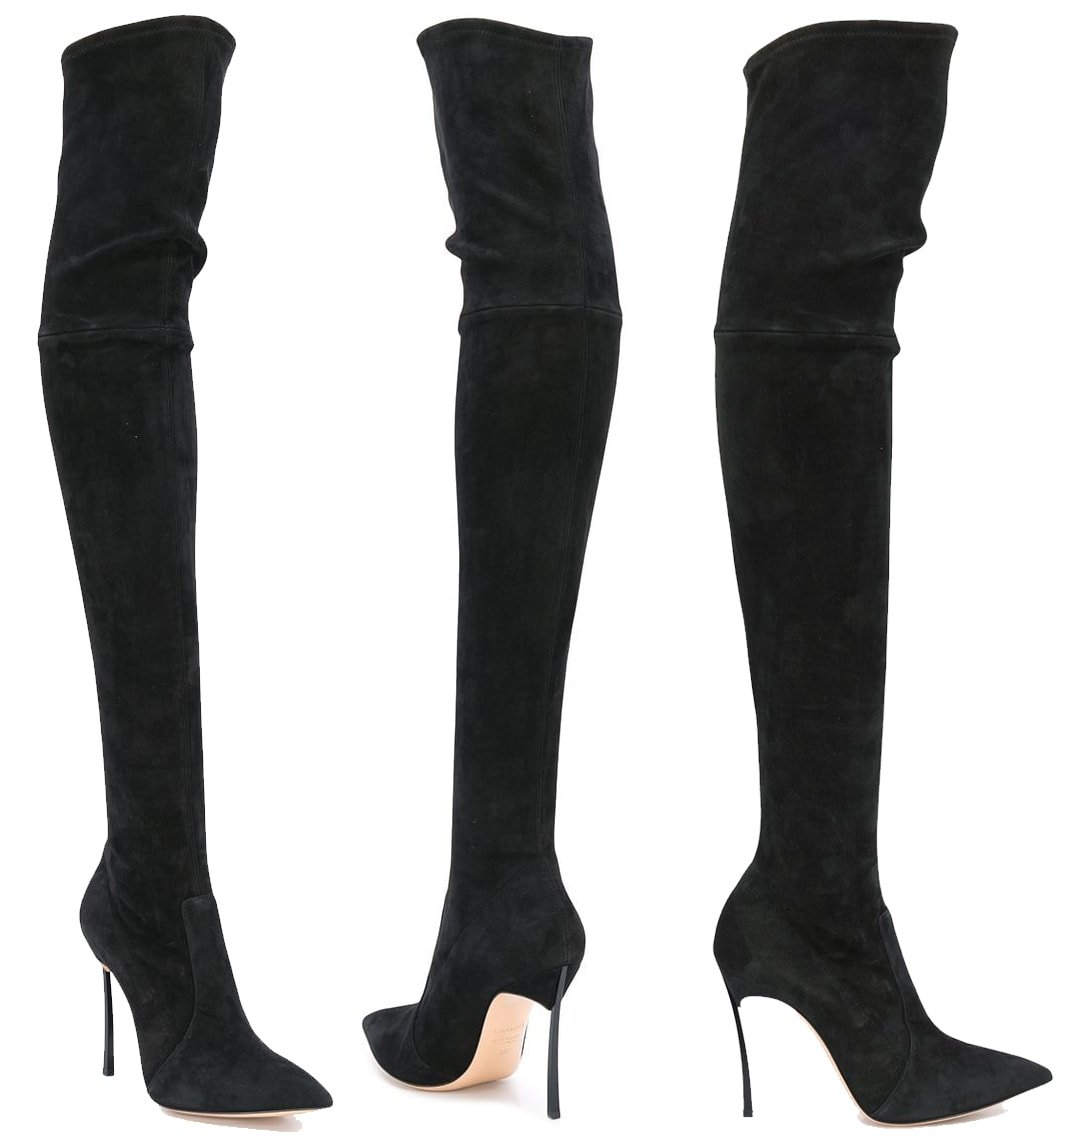 A sultry pair of slip-on over-the-knee boots made of suede, finished with the brand's signature Blade stiletto heels